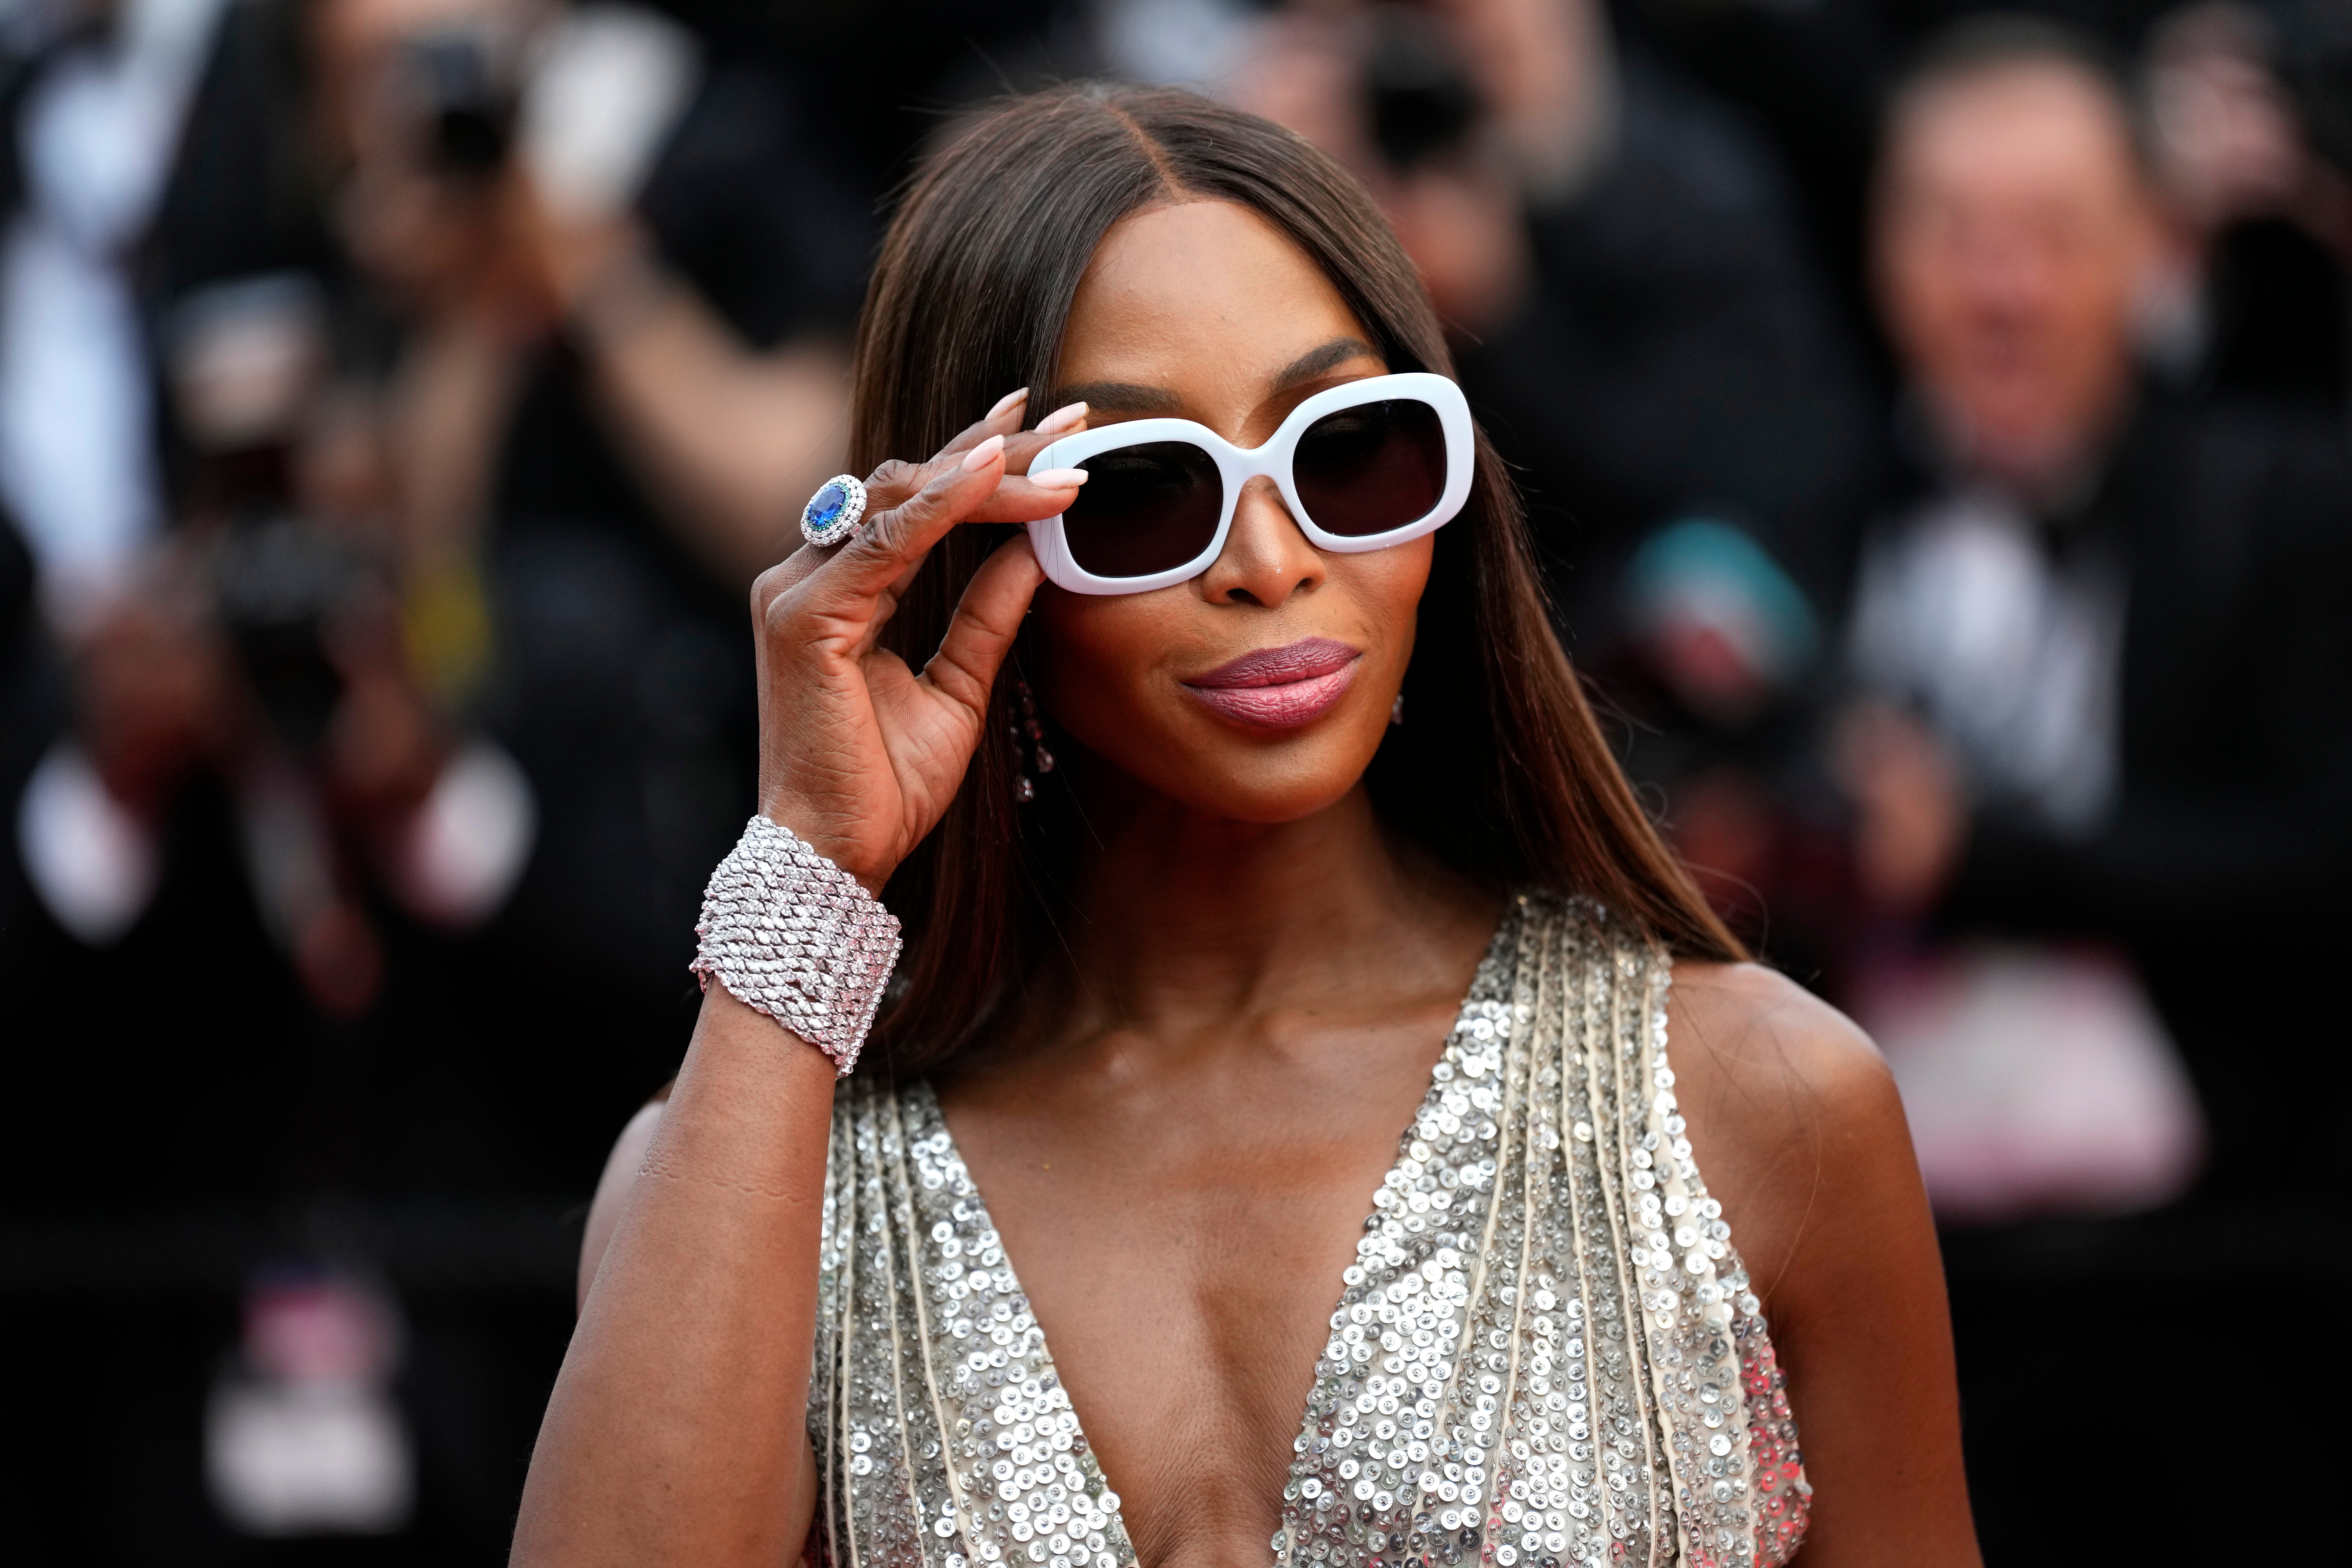 Naomi Campbell has just had her second baby aged 53